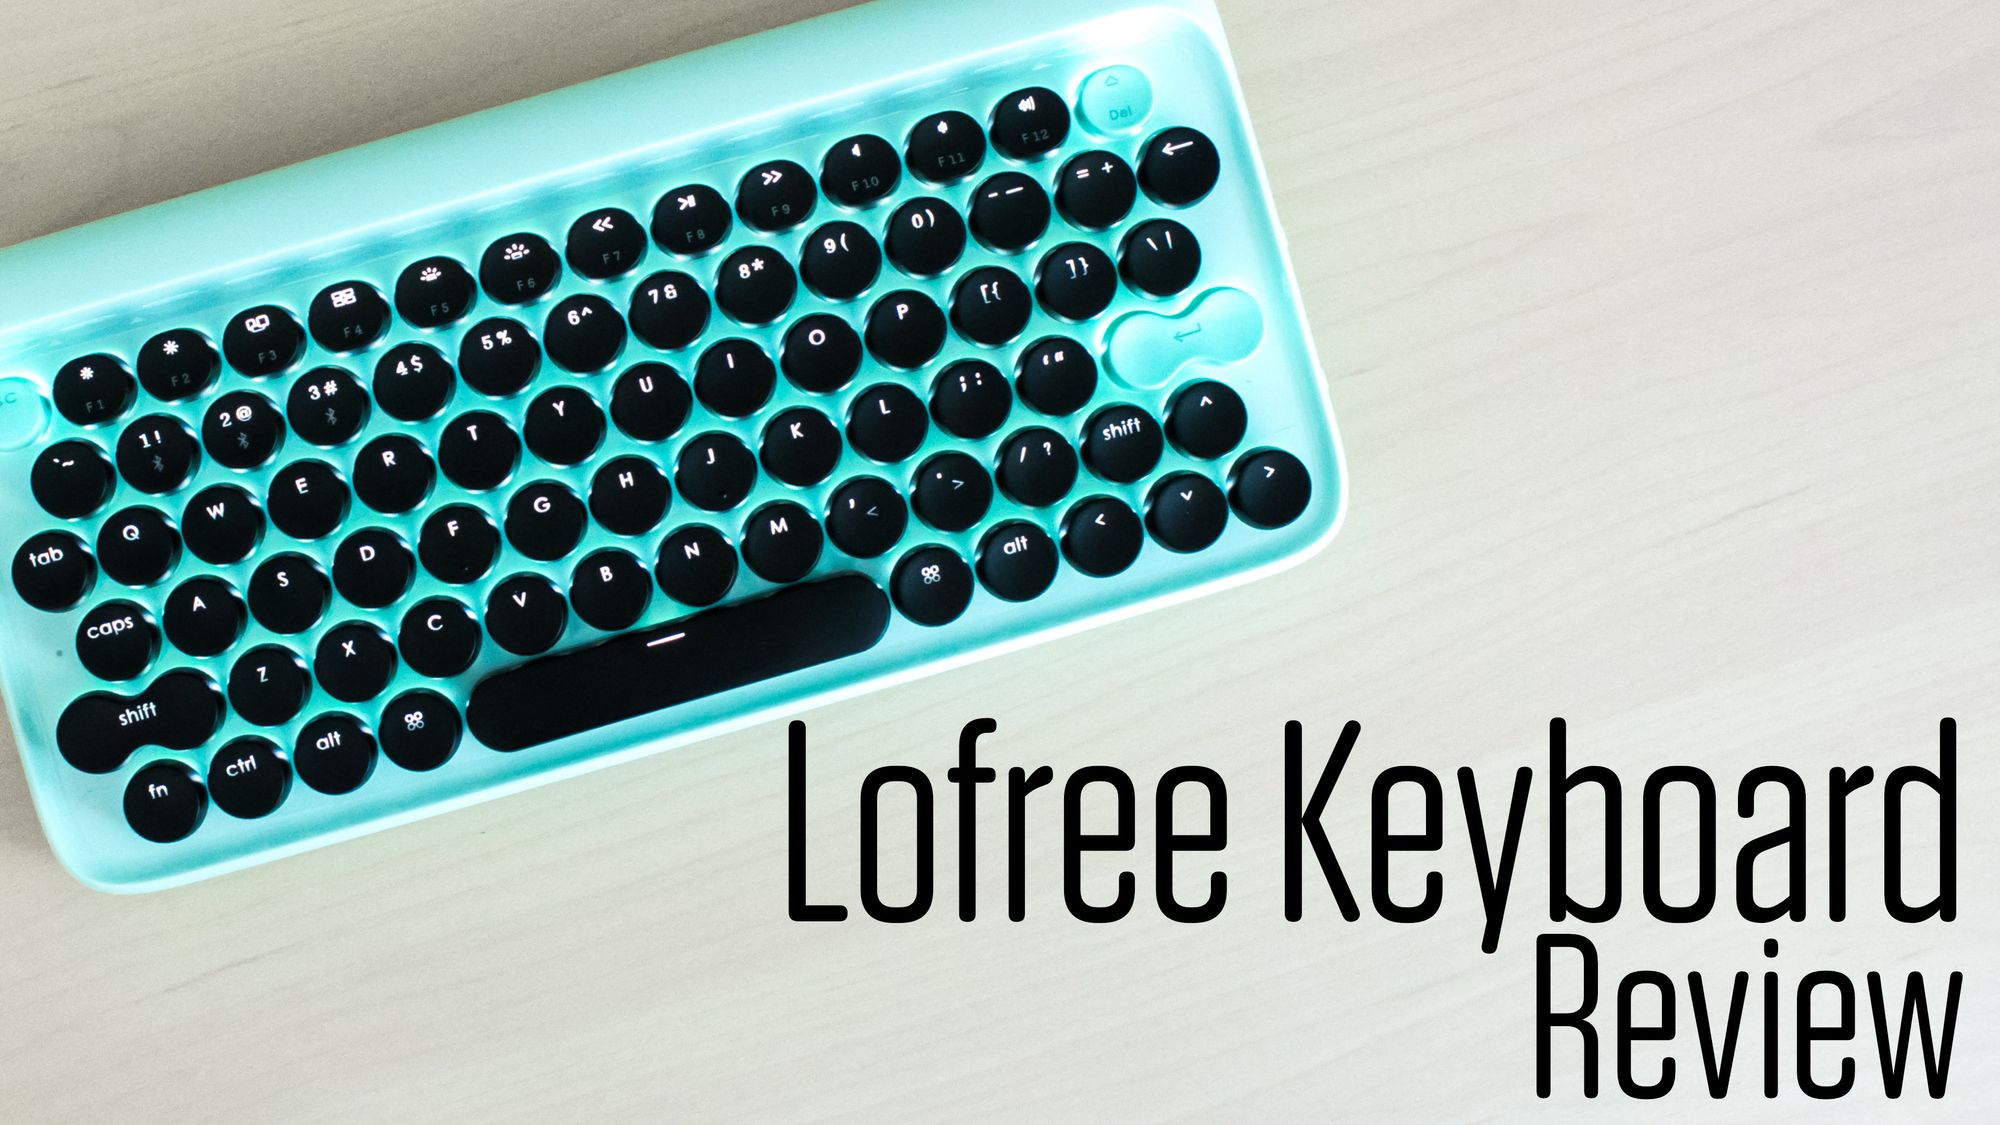 The Lofree Keyboard Review